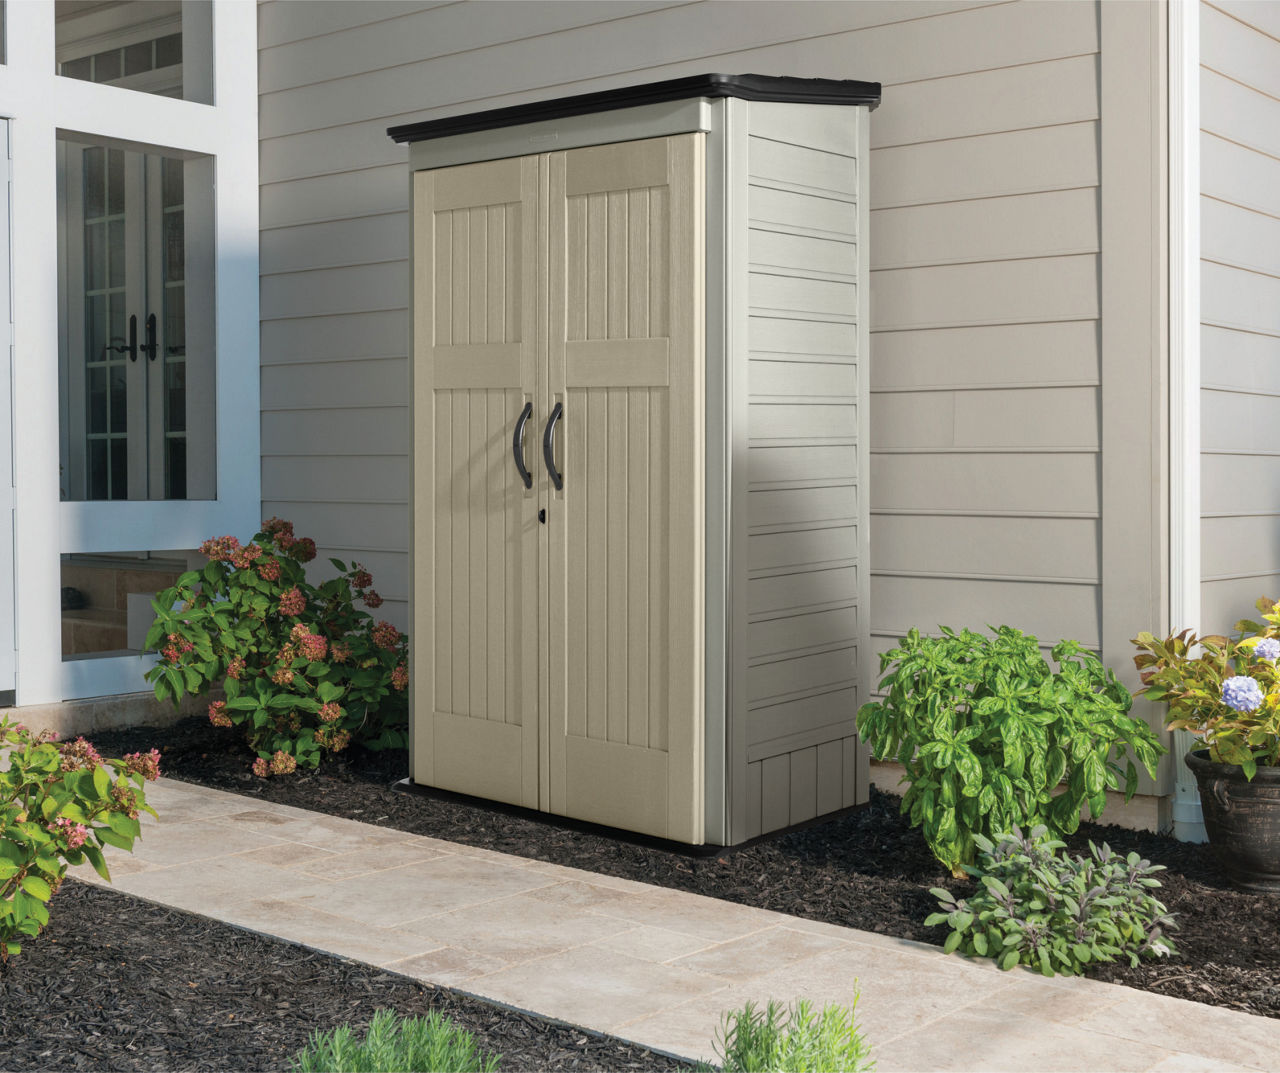 Rubbermaid 7x3 Foot Double Wall Plastic Outdoor Utility Storage Shed,  Sandstone - 269.60 - Bed Bath & Beyond - 35447483